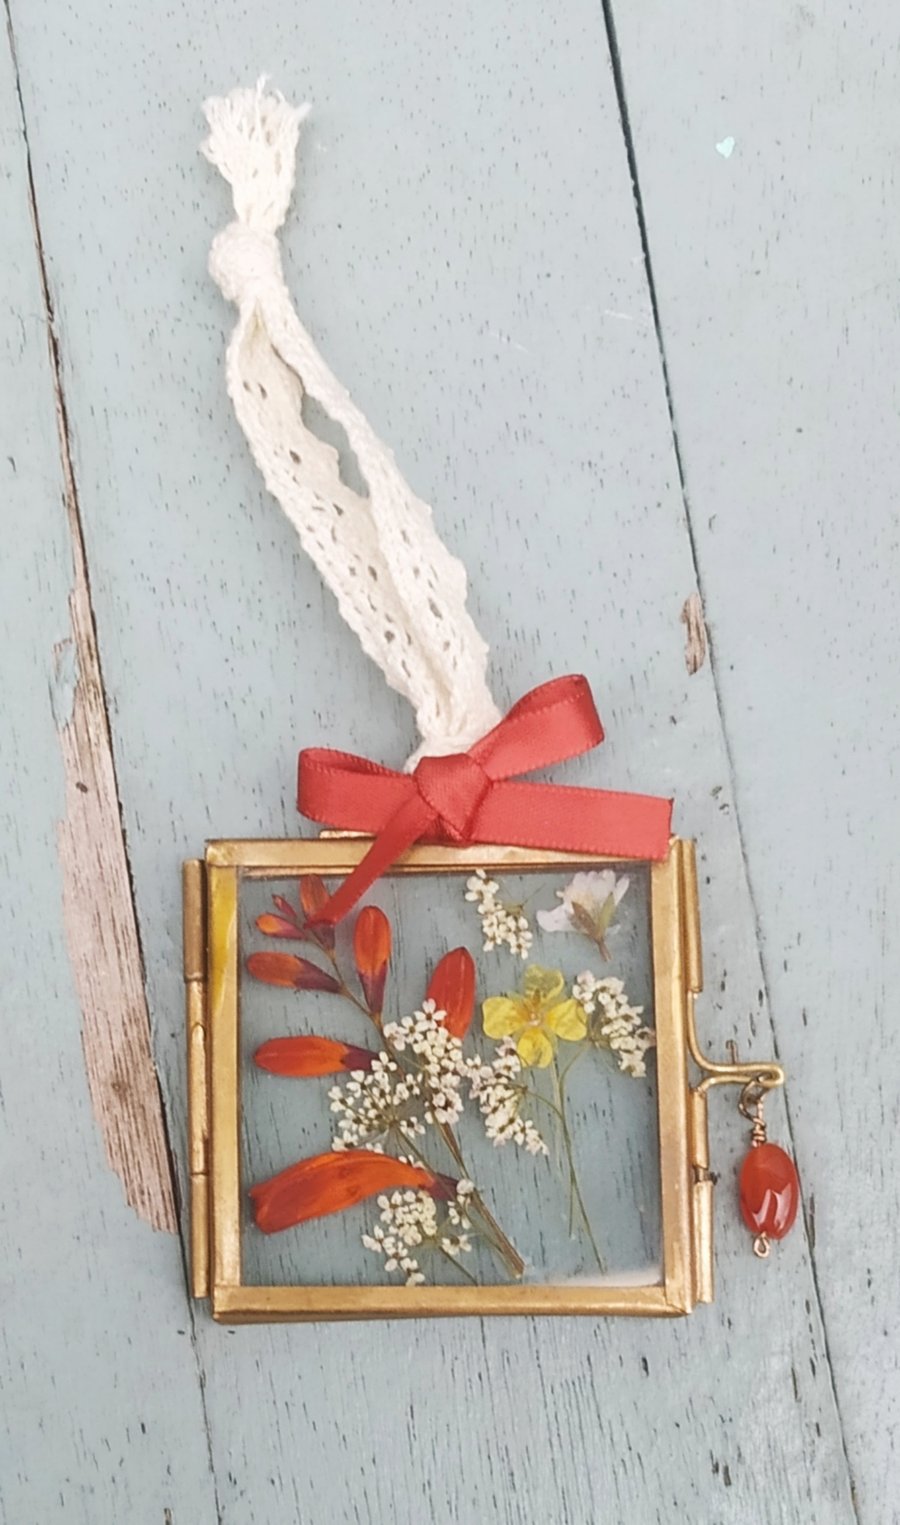 Pressed flower glass frame decoration, floral gifts, gardeners gifts, nature.